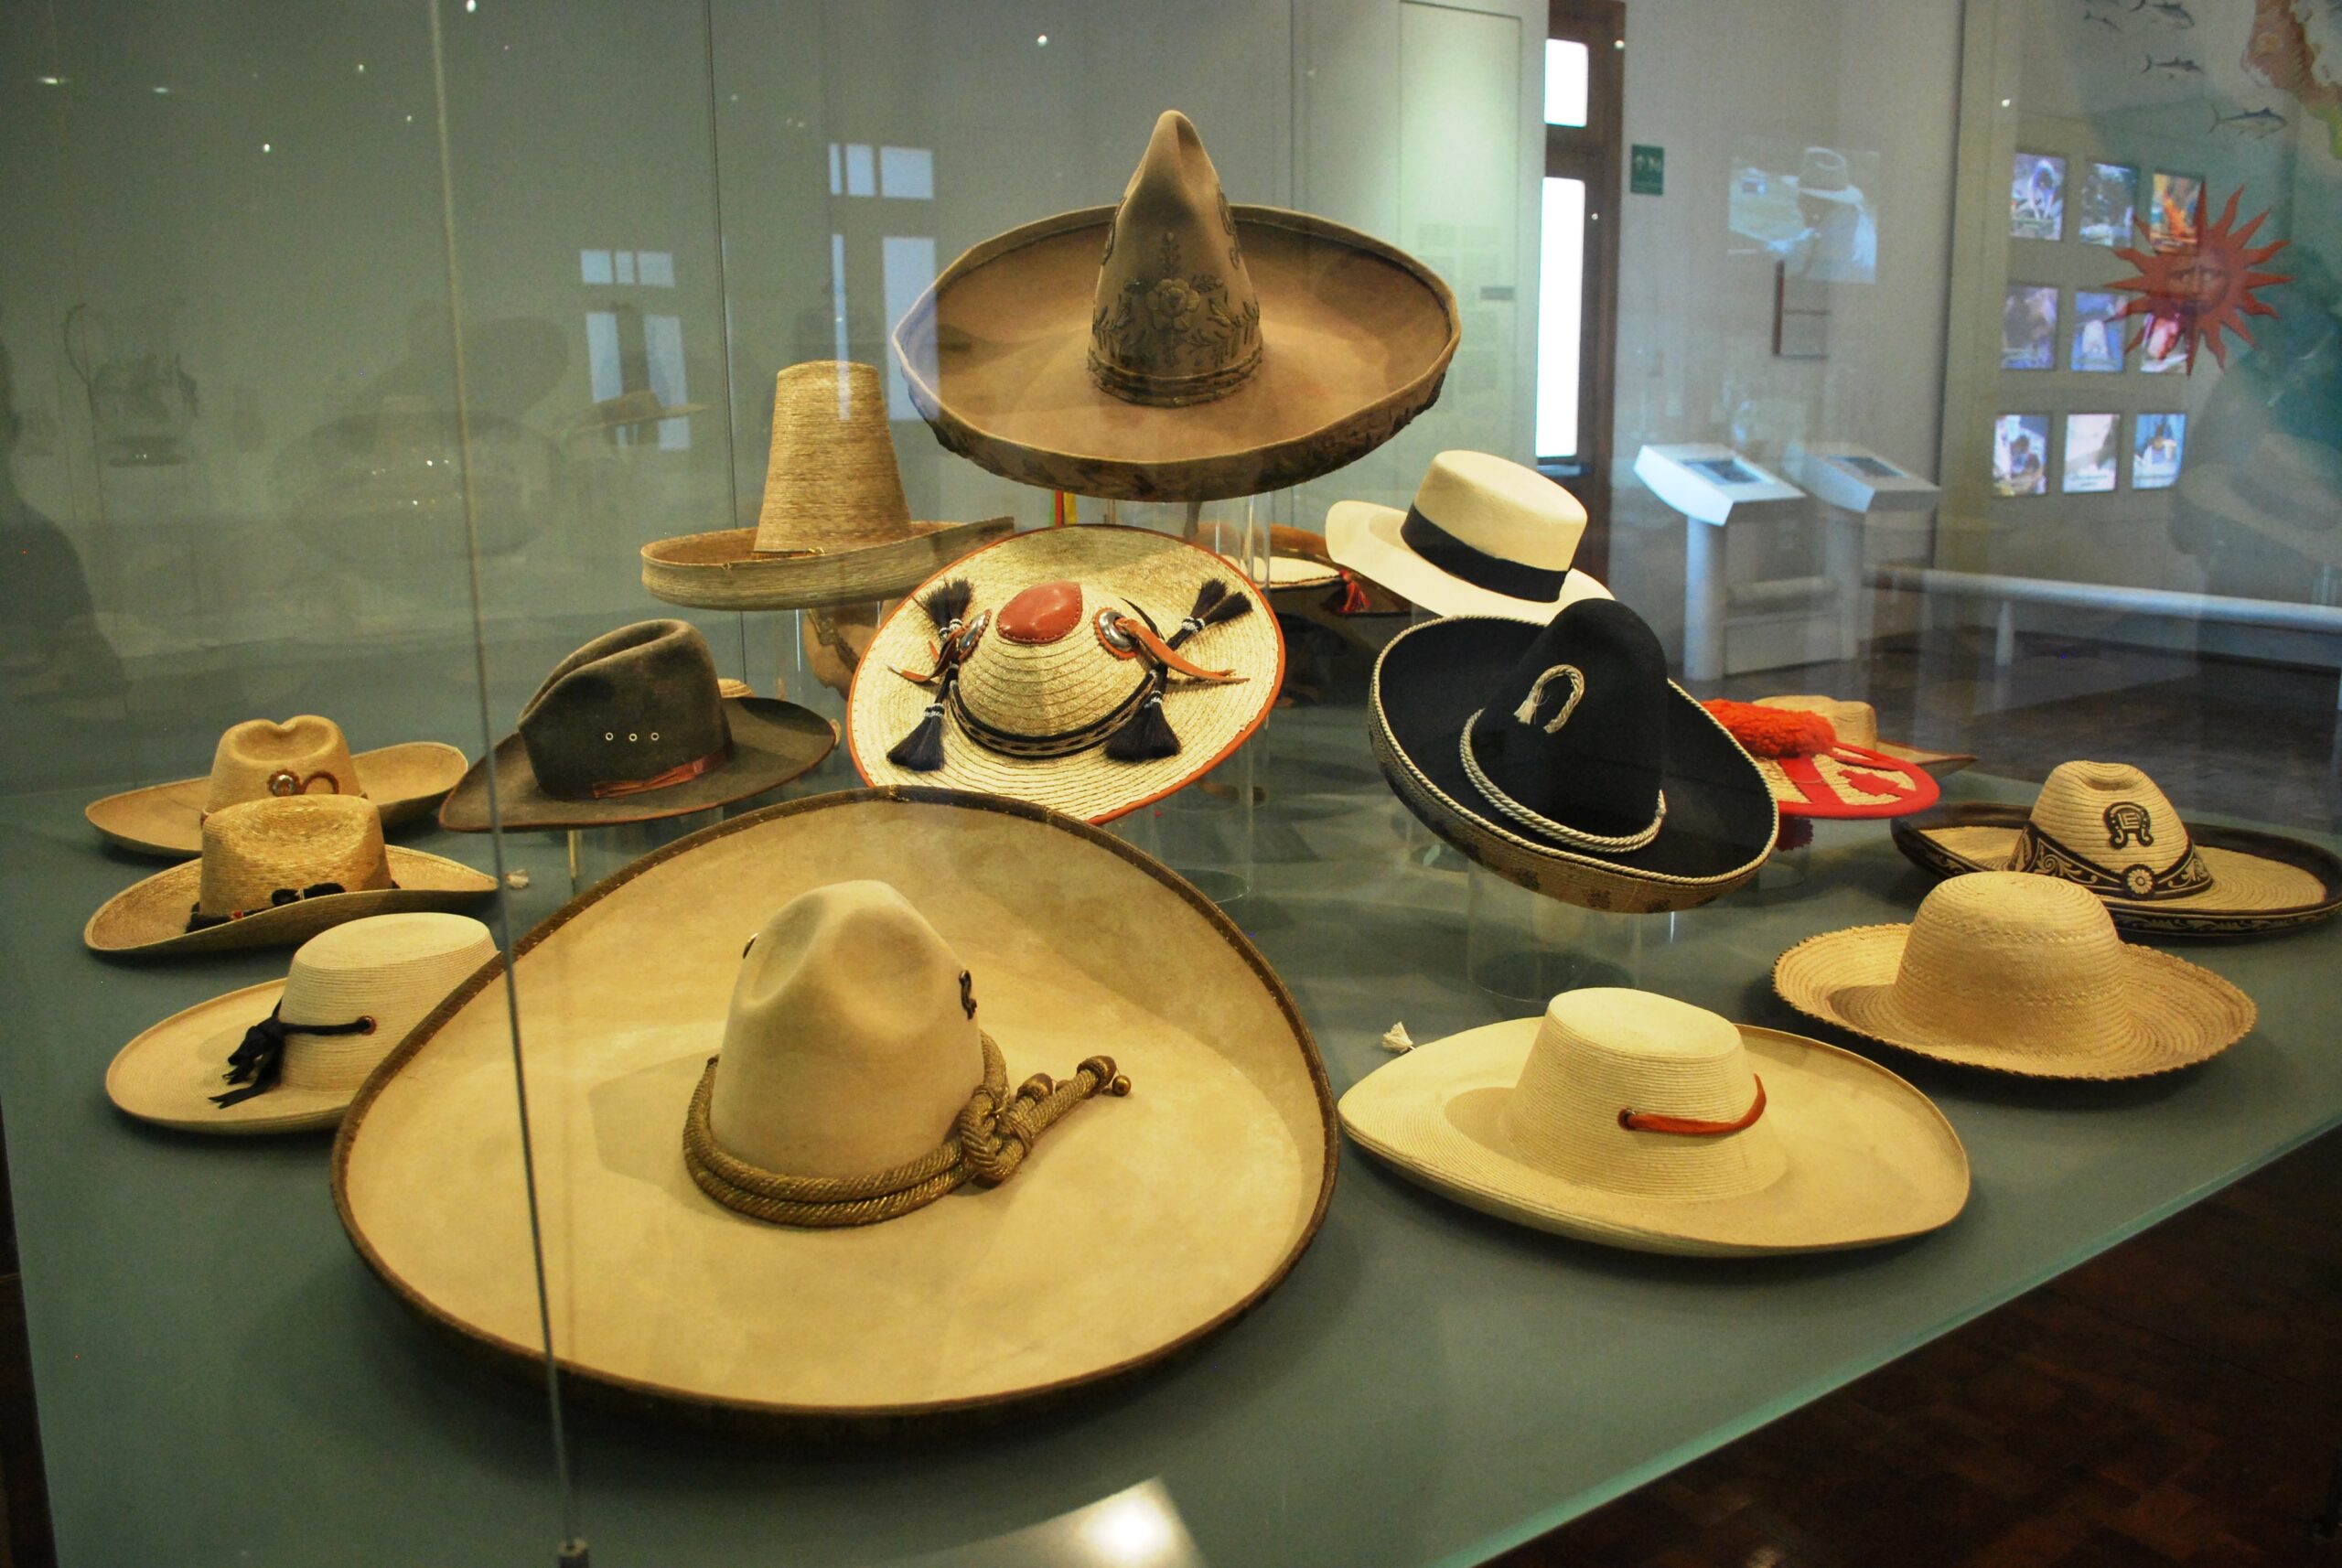 Design and style changes to the traditional cowboy hats are driving more women towards it